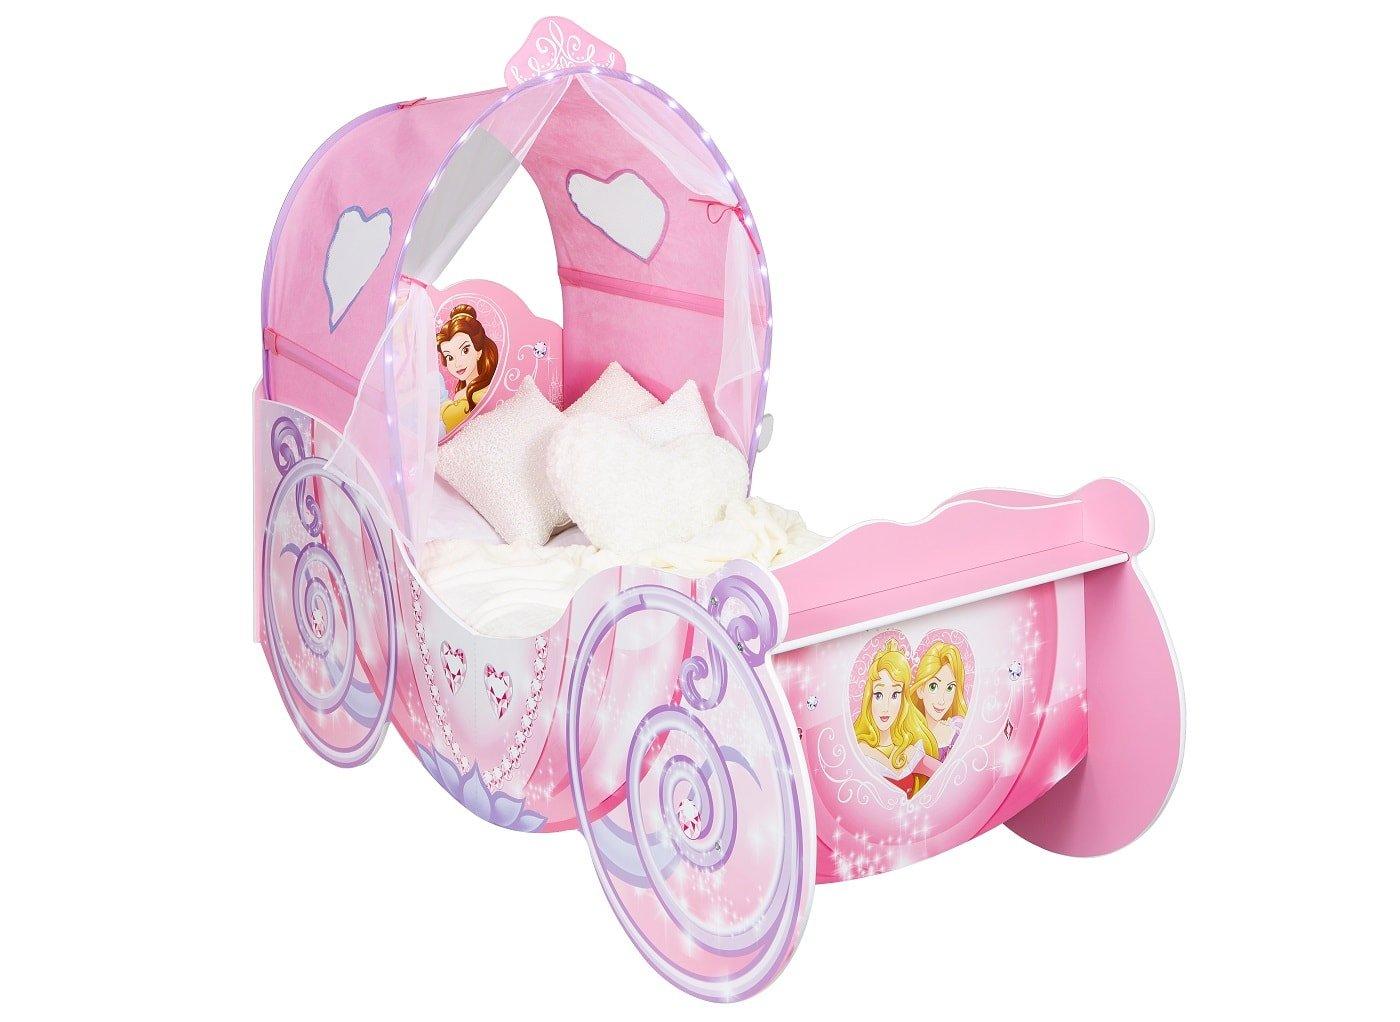 Disney Princess Carriage Toddler Bed Frame With Canopy